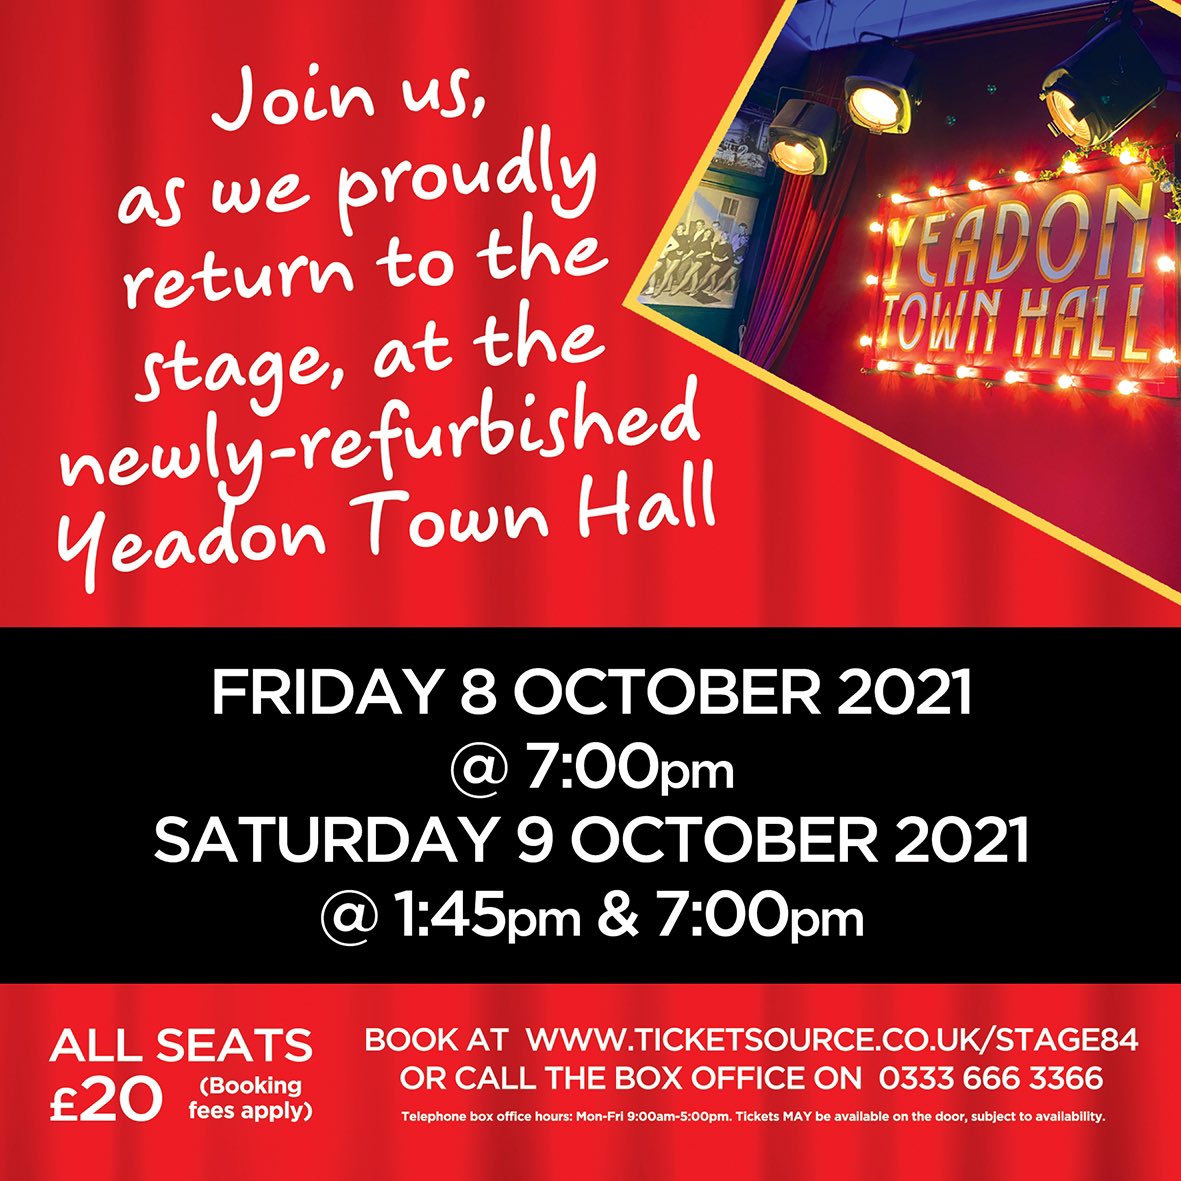 We’re very proud to be making our return to full scale live theatre next month at Yeadon Town Hall, with 2 shows in 1! Stage 84 proudly presents Disney’s Moana Jr and Fame Jr, Fri 8th and Sat 9th October. Book your tickets now at ticketsource.co.uk/stage84